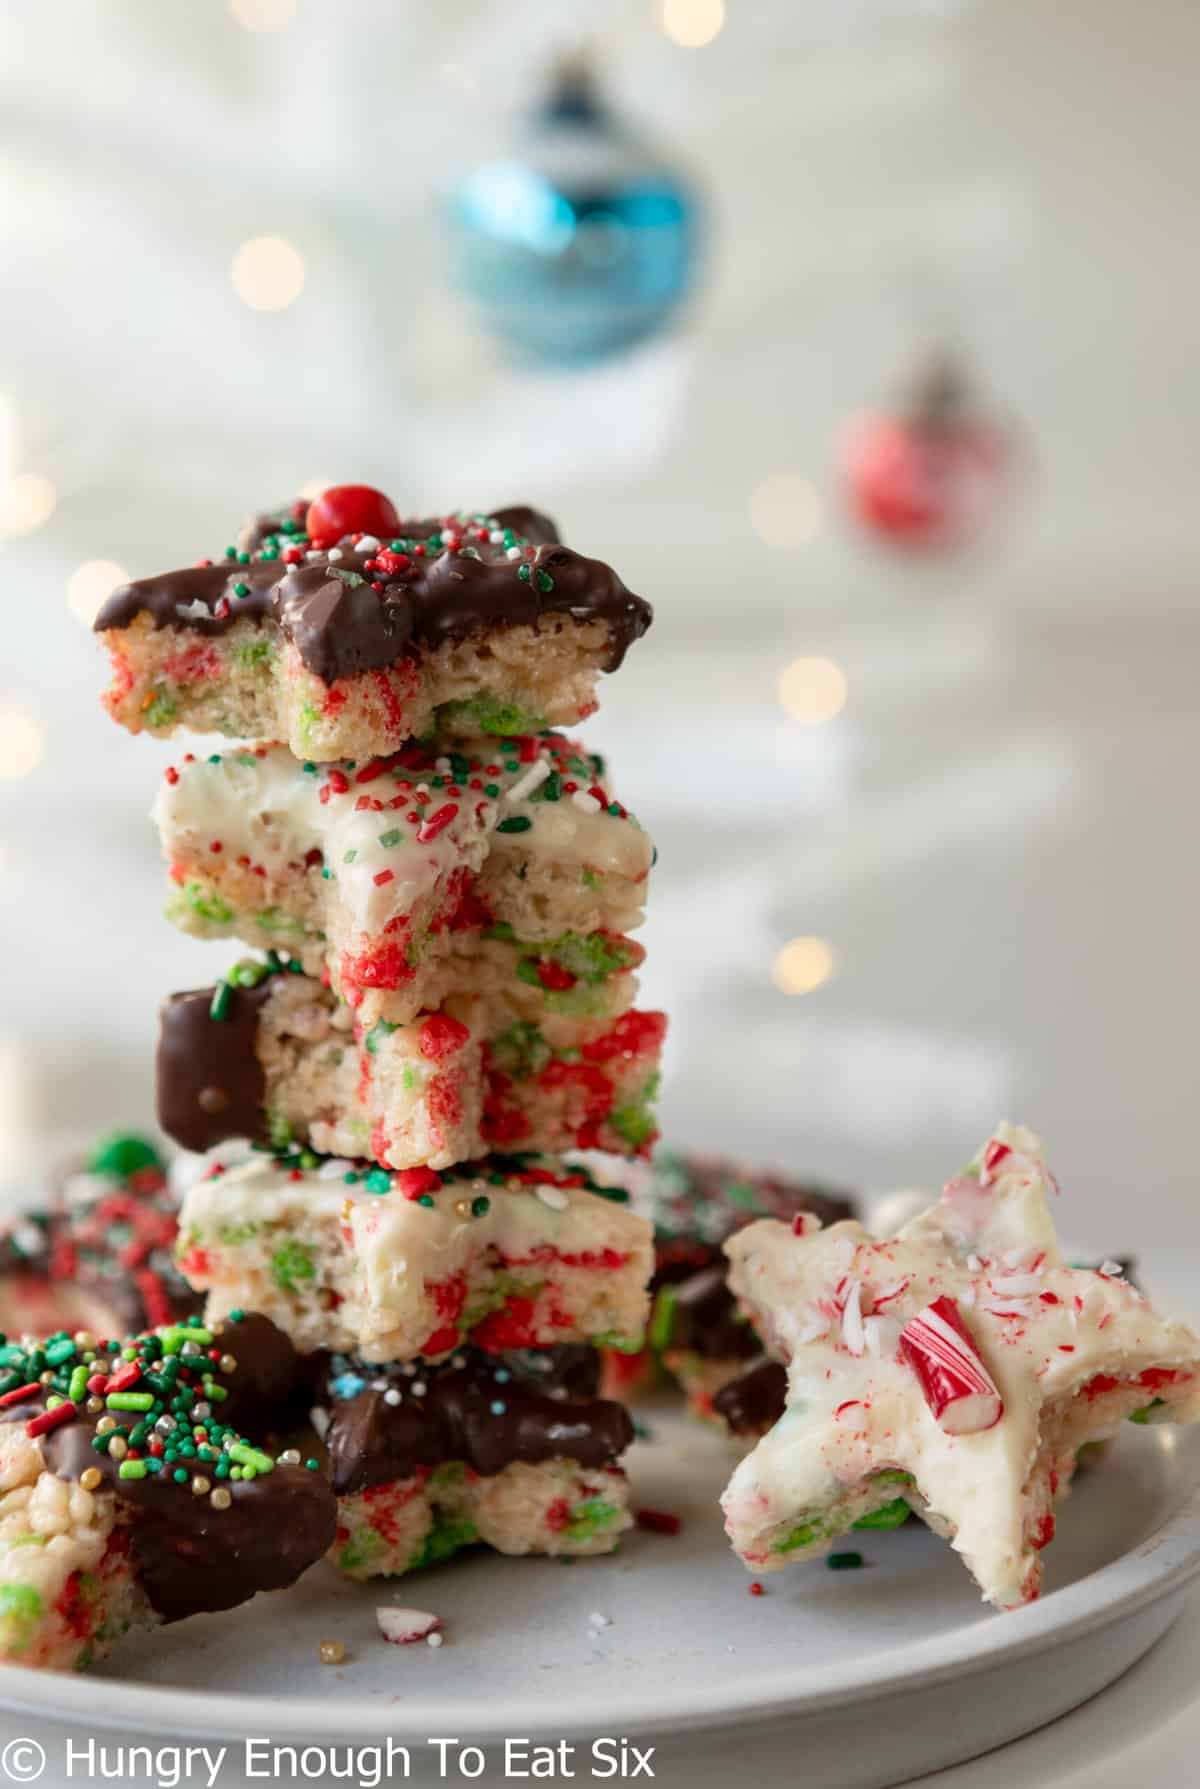 Stack of decorated star-shaped marshmallow treats.